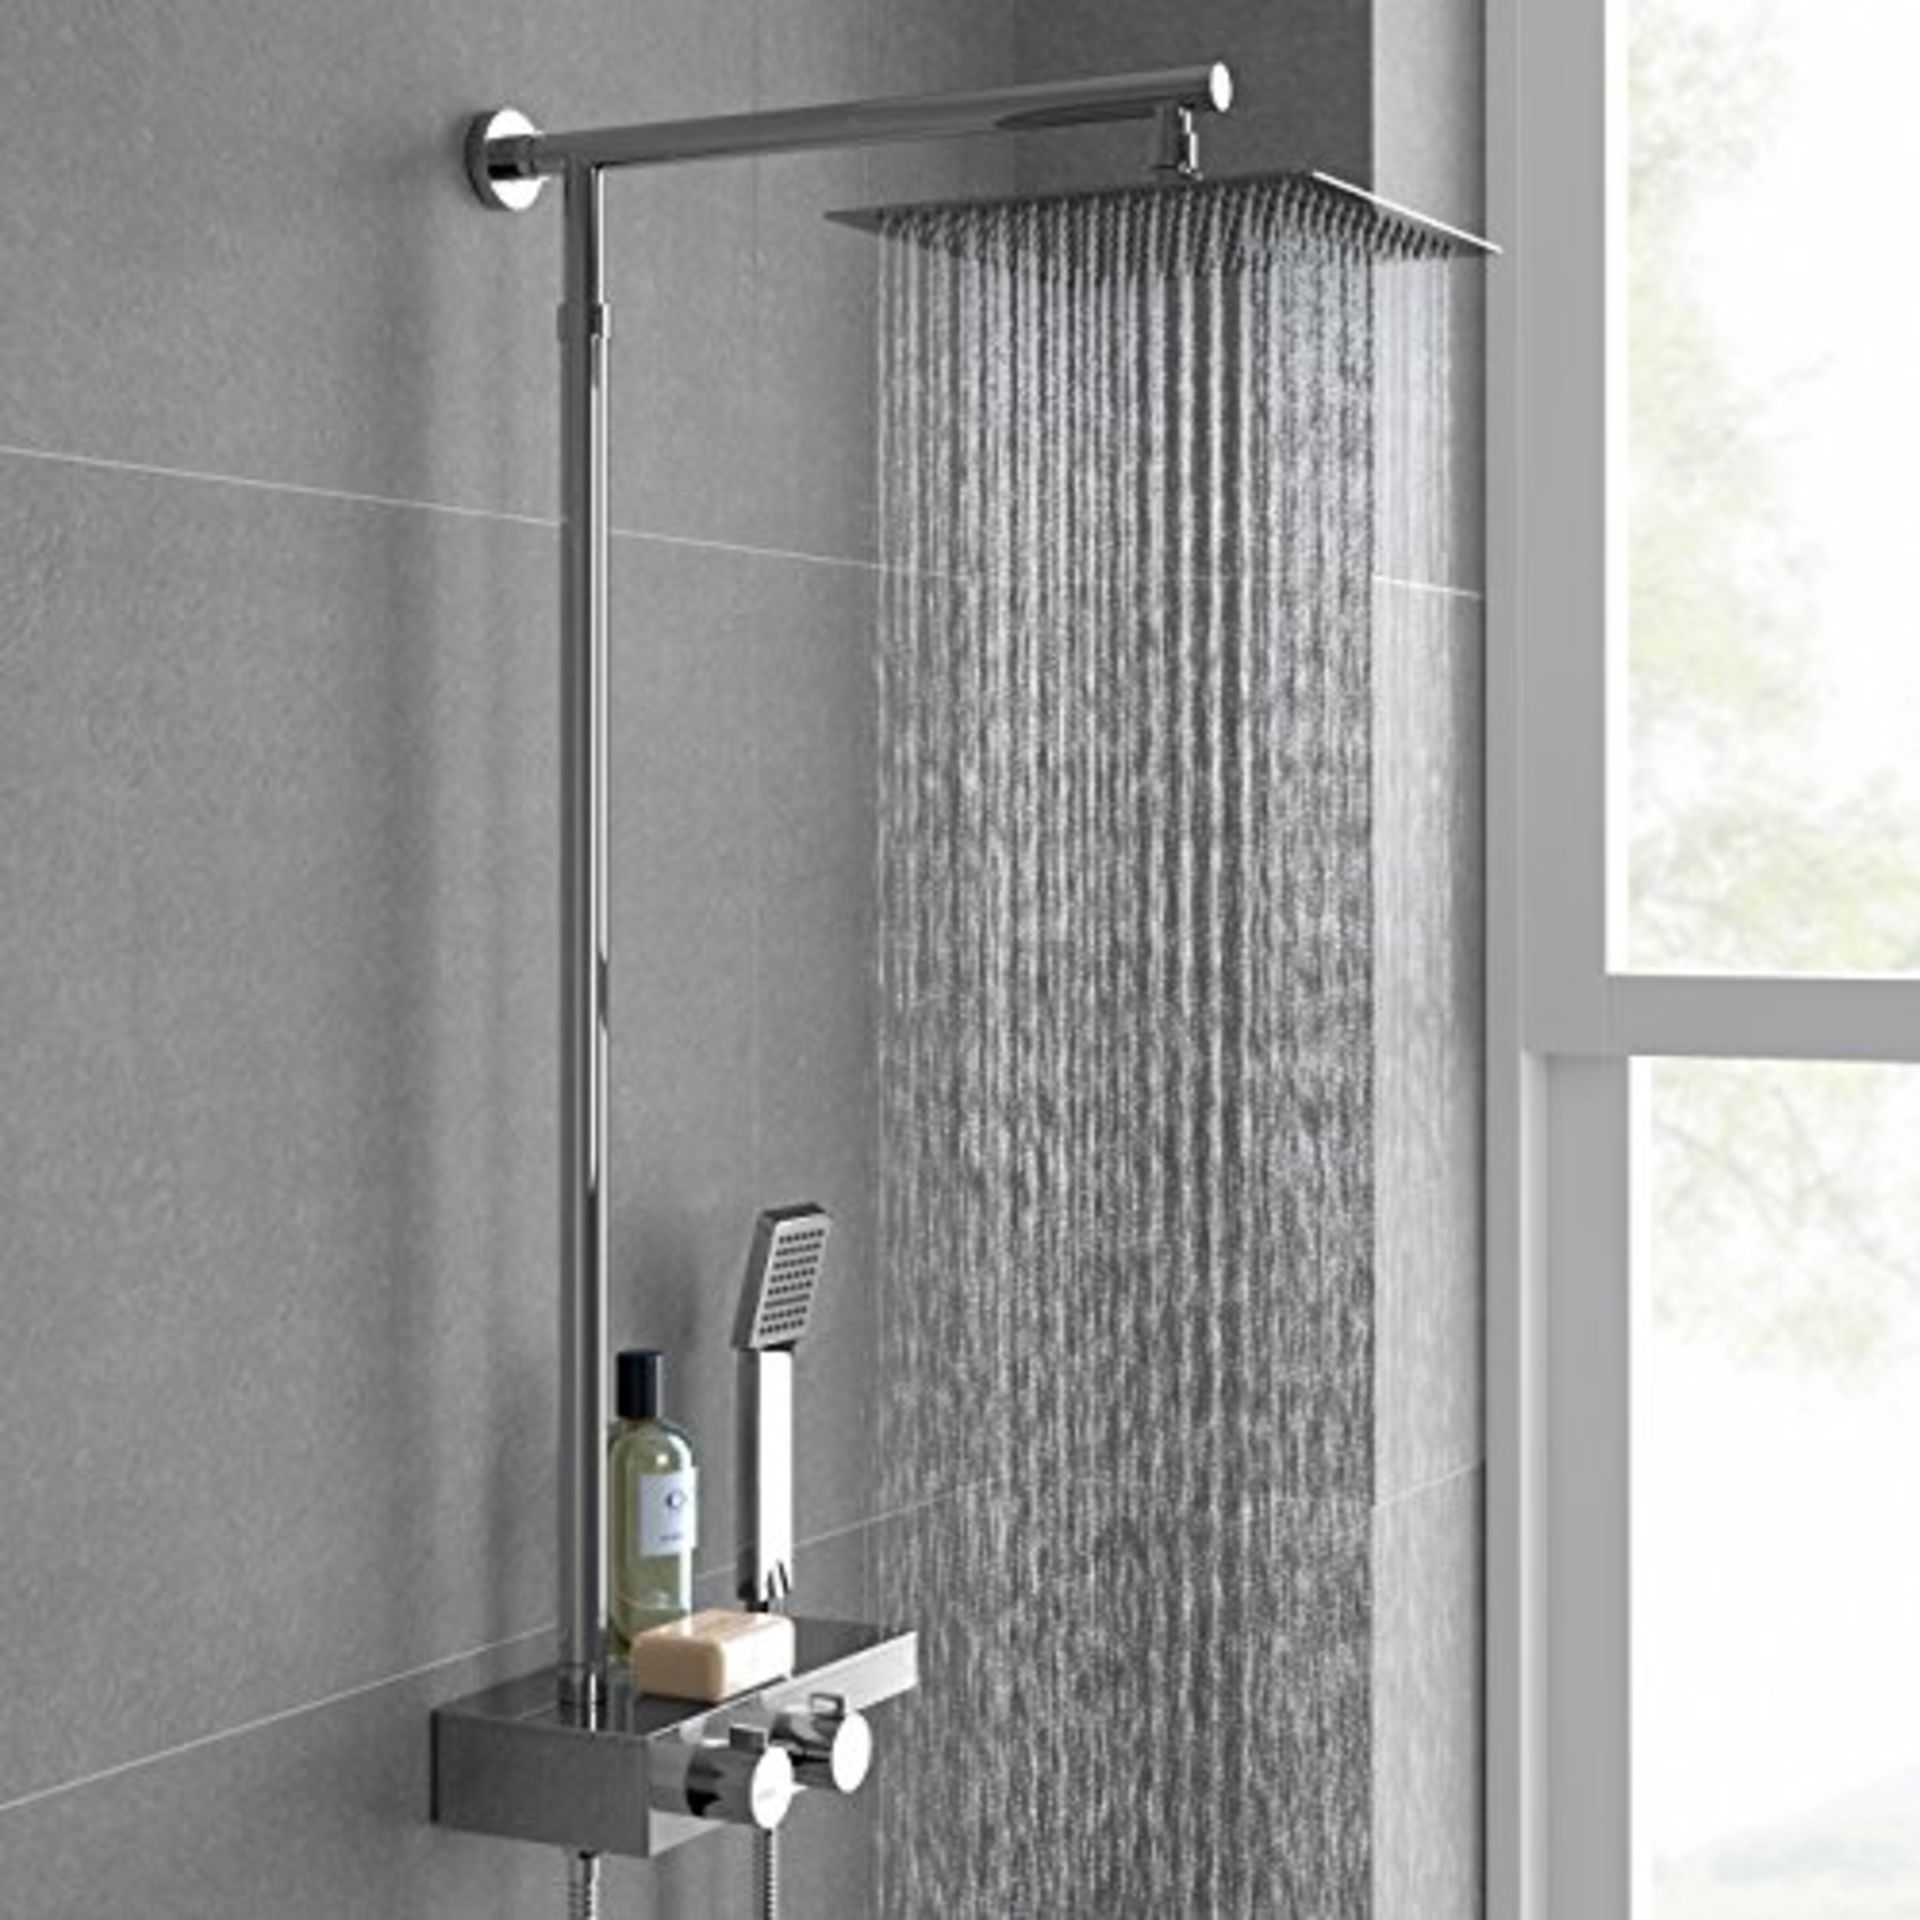 (KN129) Square Thermostatic Bar Mixer Shower Set Valve with Shelf 10" Head + Handset . Solid br...